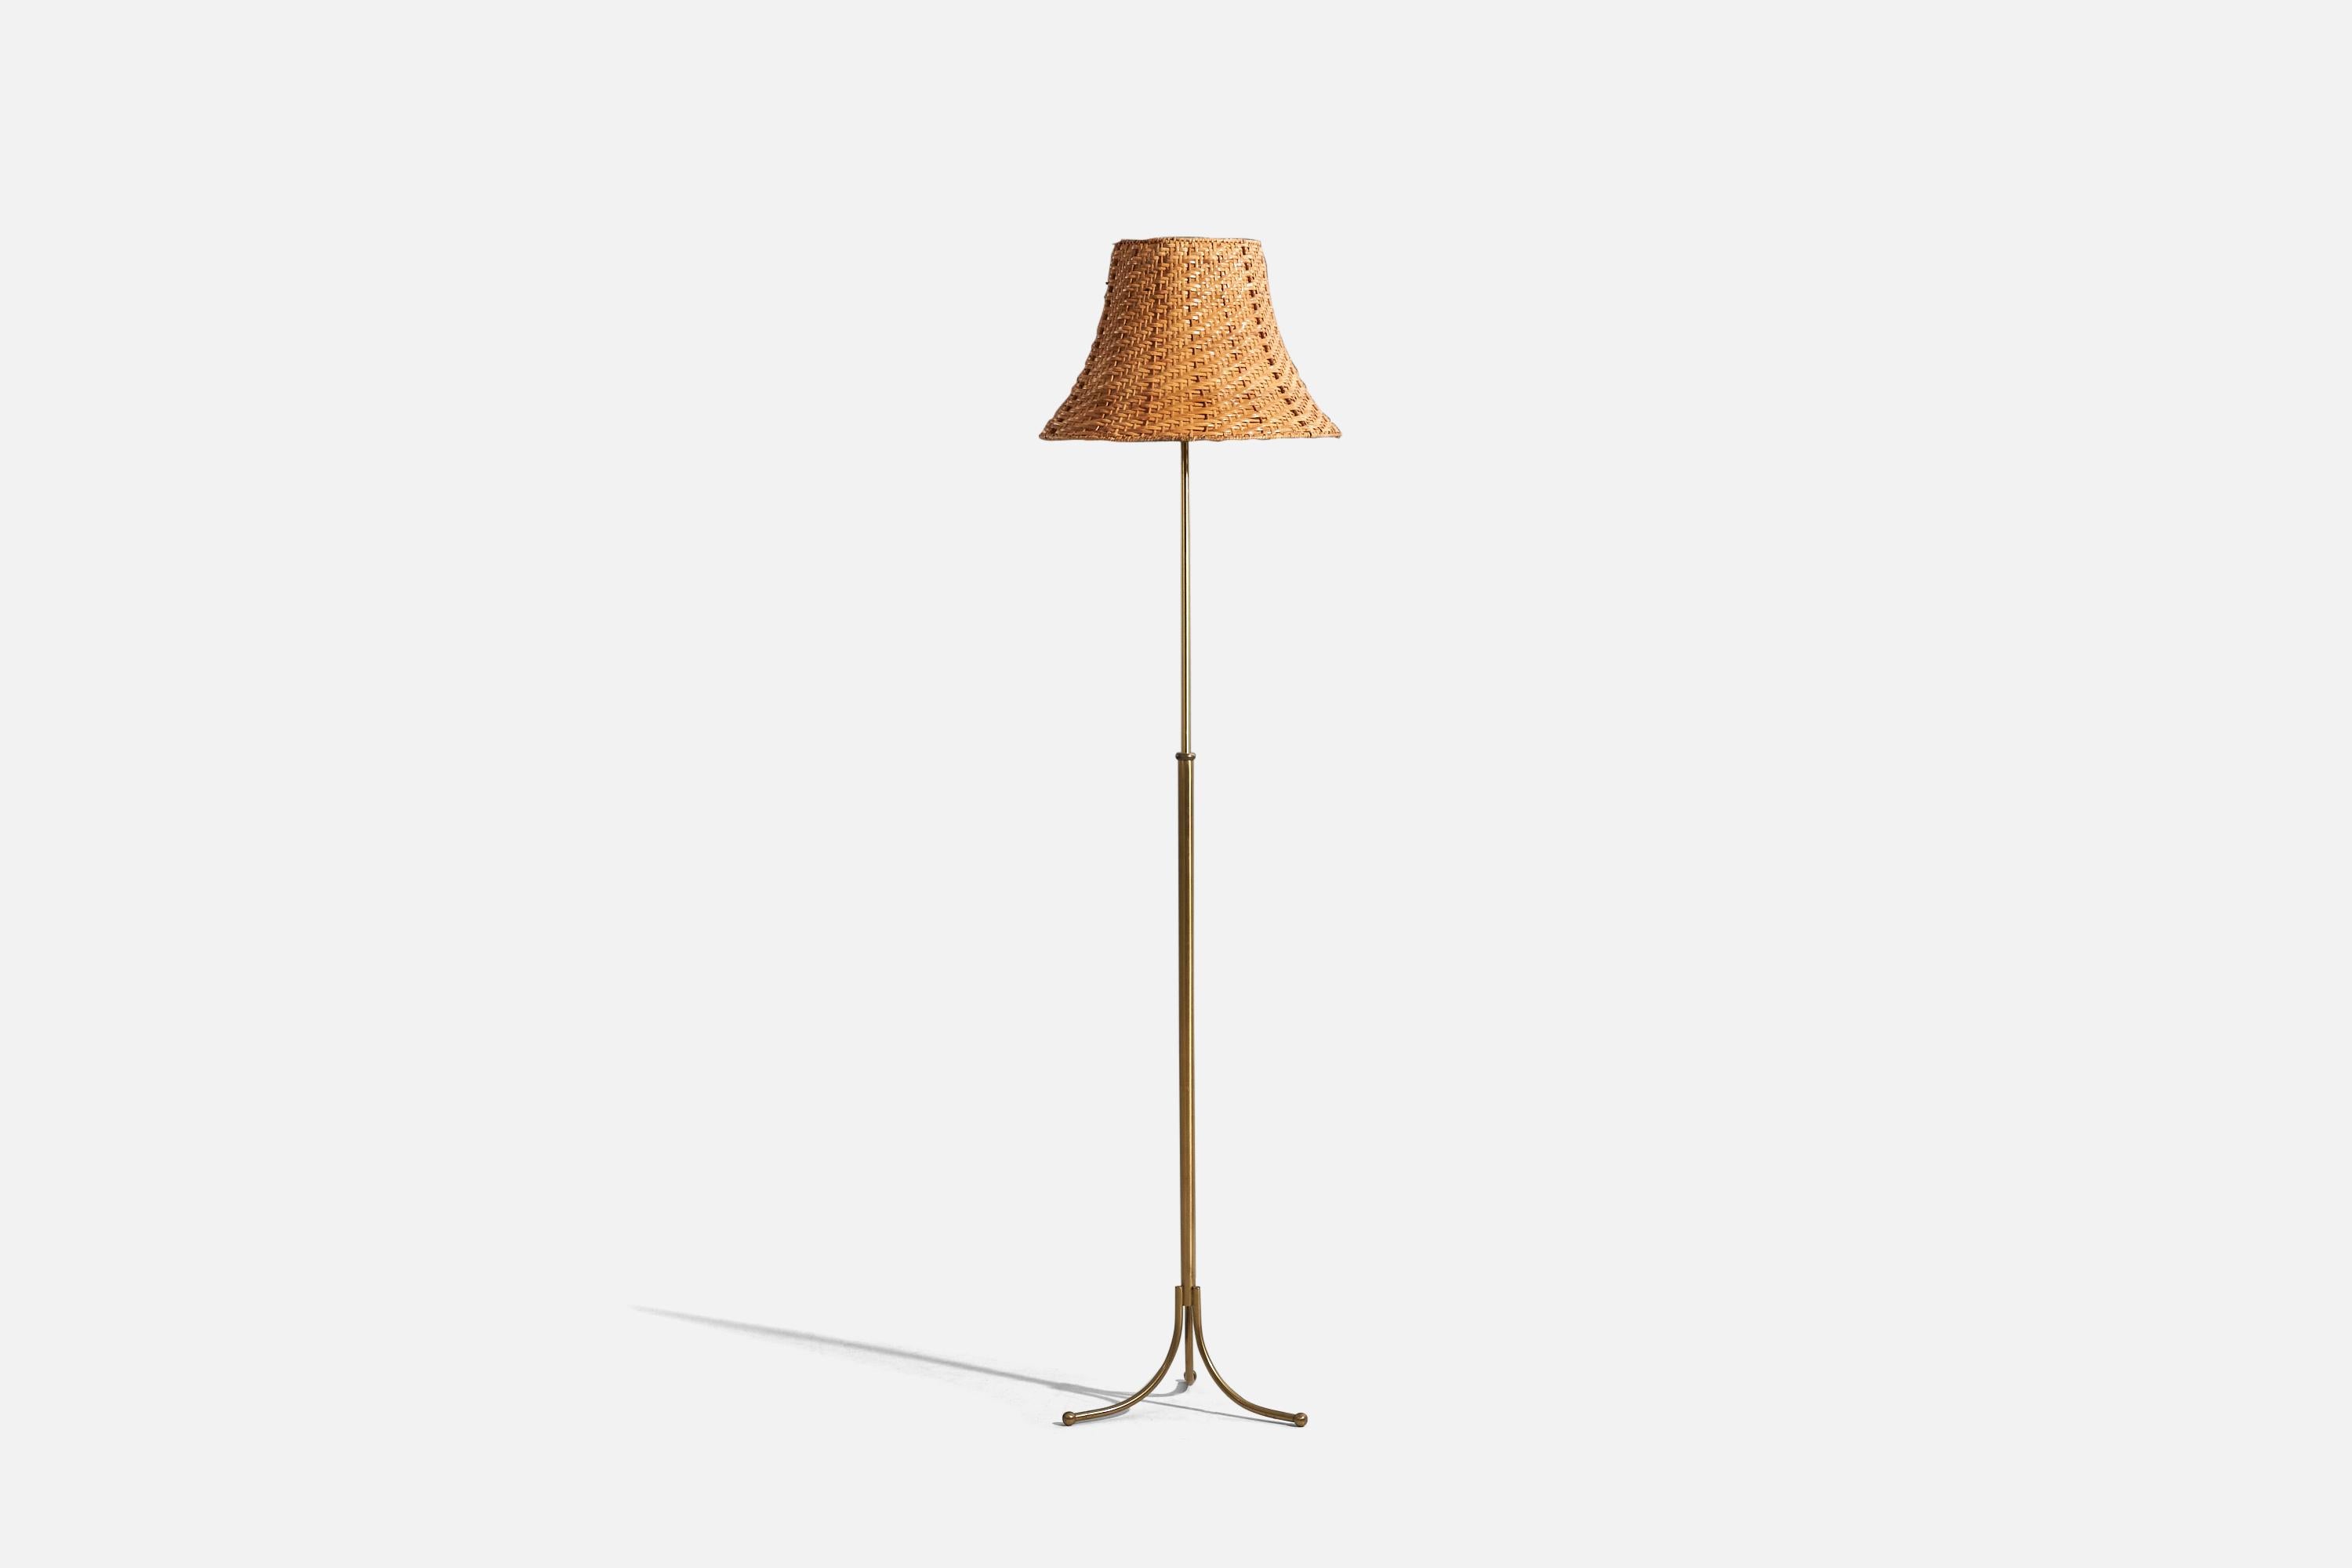 A brass and rattan floor lamp designed by Josef Frank and produced by Svenskt Tenn, Sweden, 1950s.